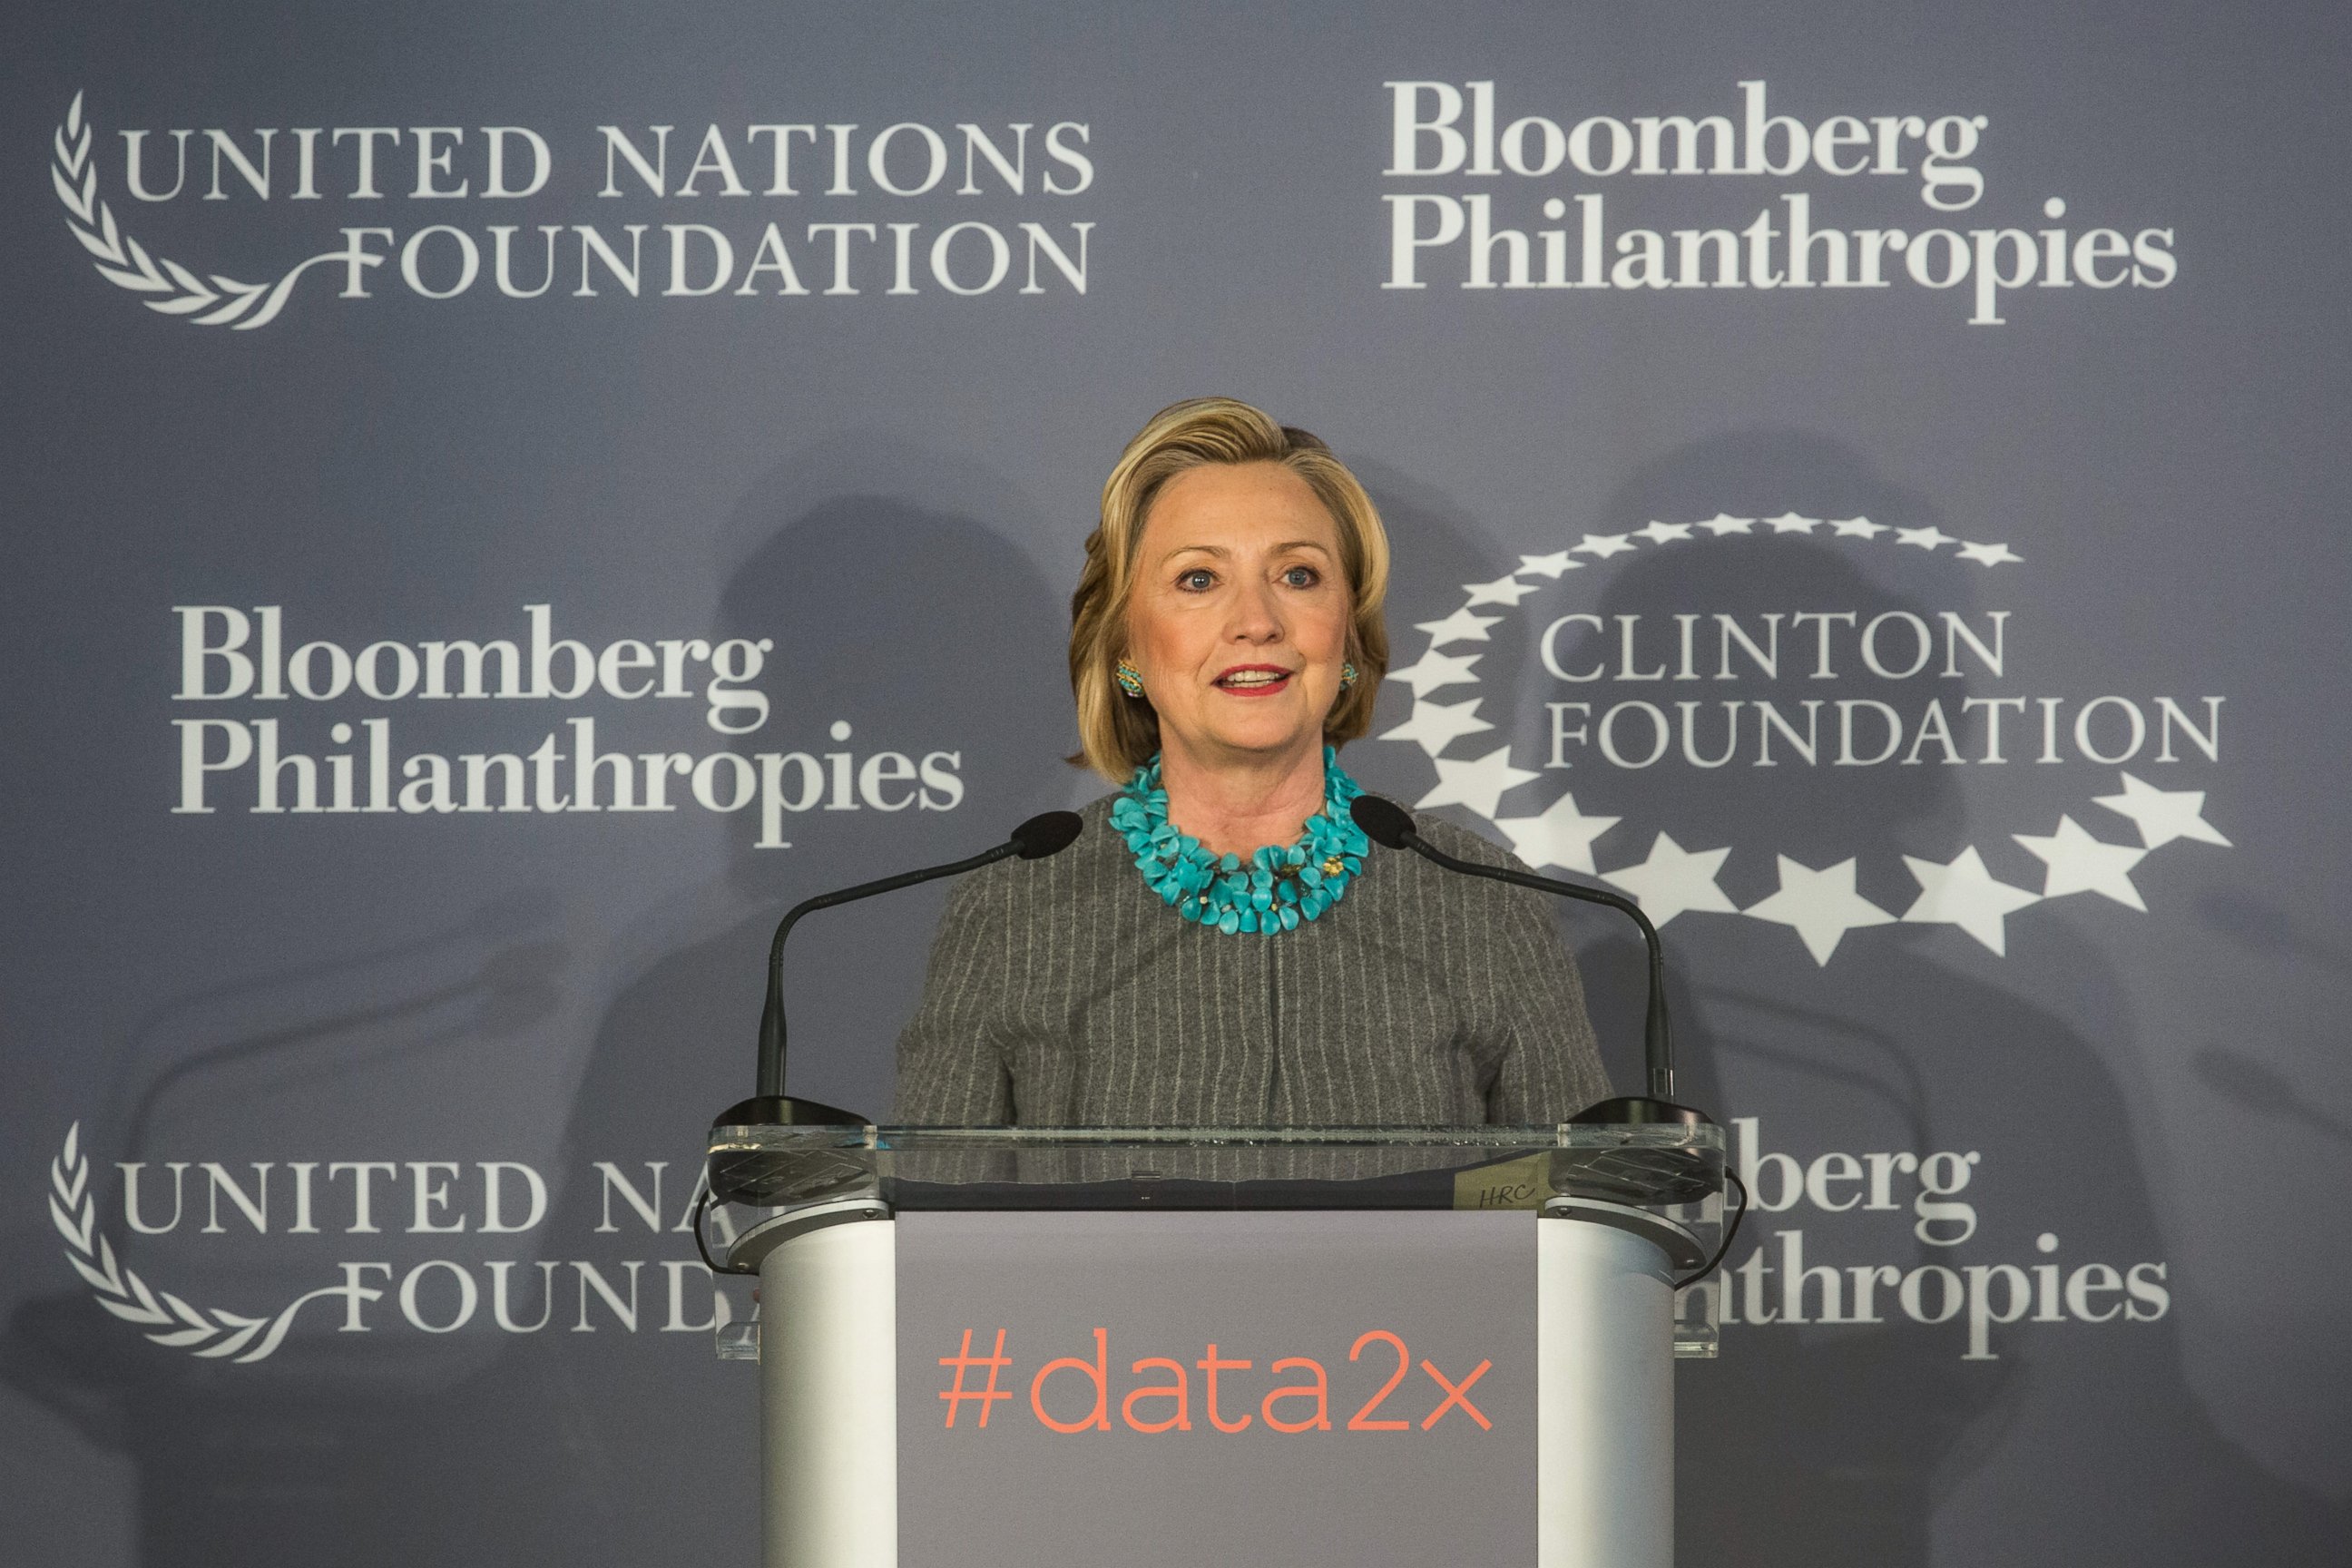 PHOTO: Former U.S. Secretary of State and first lady Hillary Clinton speaks at a press conference announcing a new initiative between the Clinton Foundation, United Nations Foundation and Bloomberg Philanthropies, on Dec. 15, 2014, in New York City. 